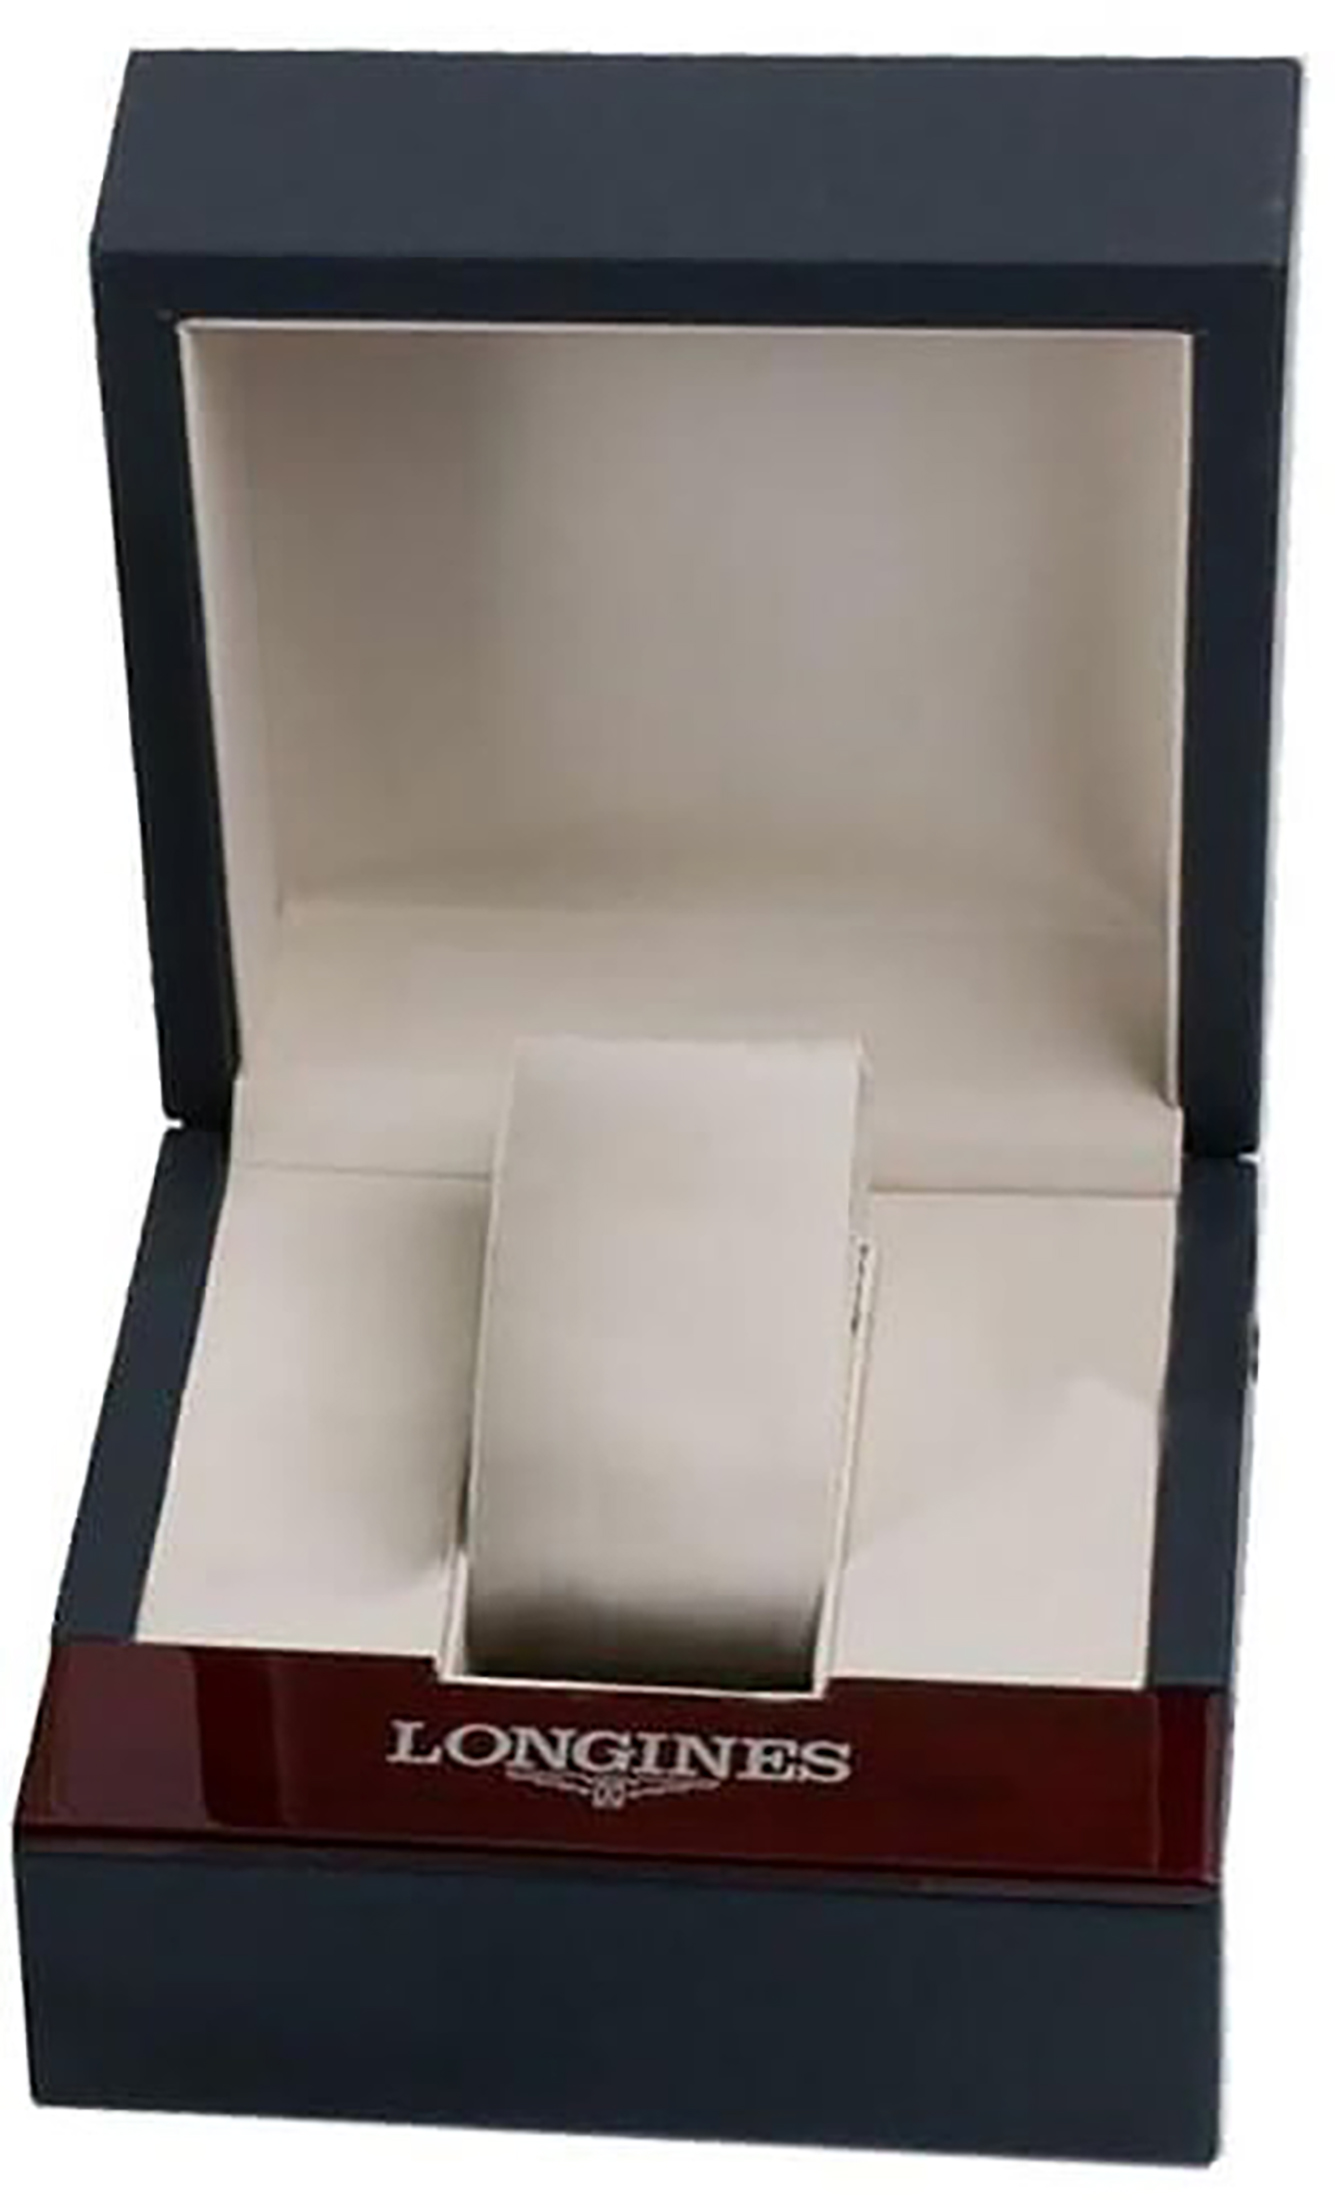 Longines Master Collection Silver Dial Men's Watch L2.631.4.70.6 - image 4 of 4